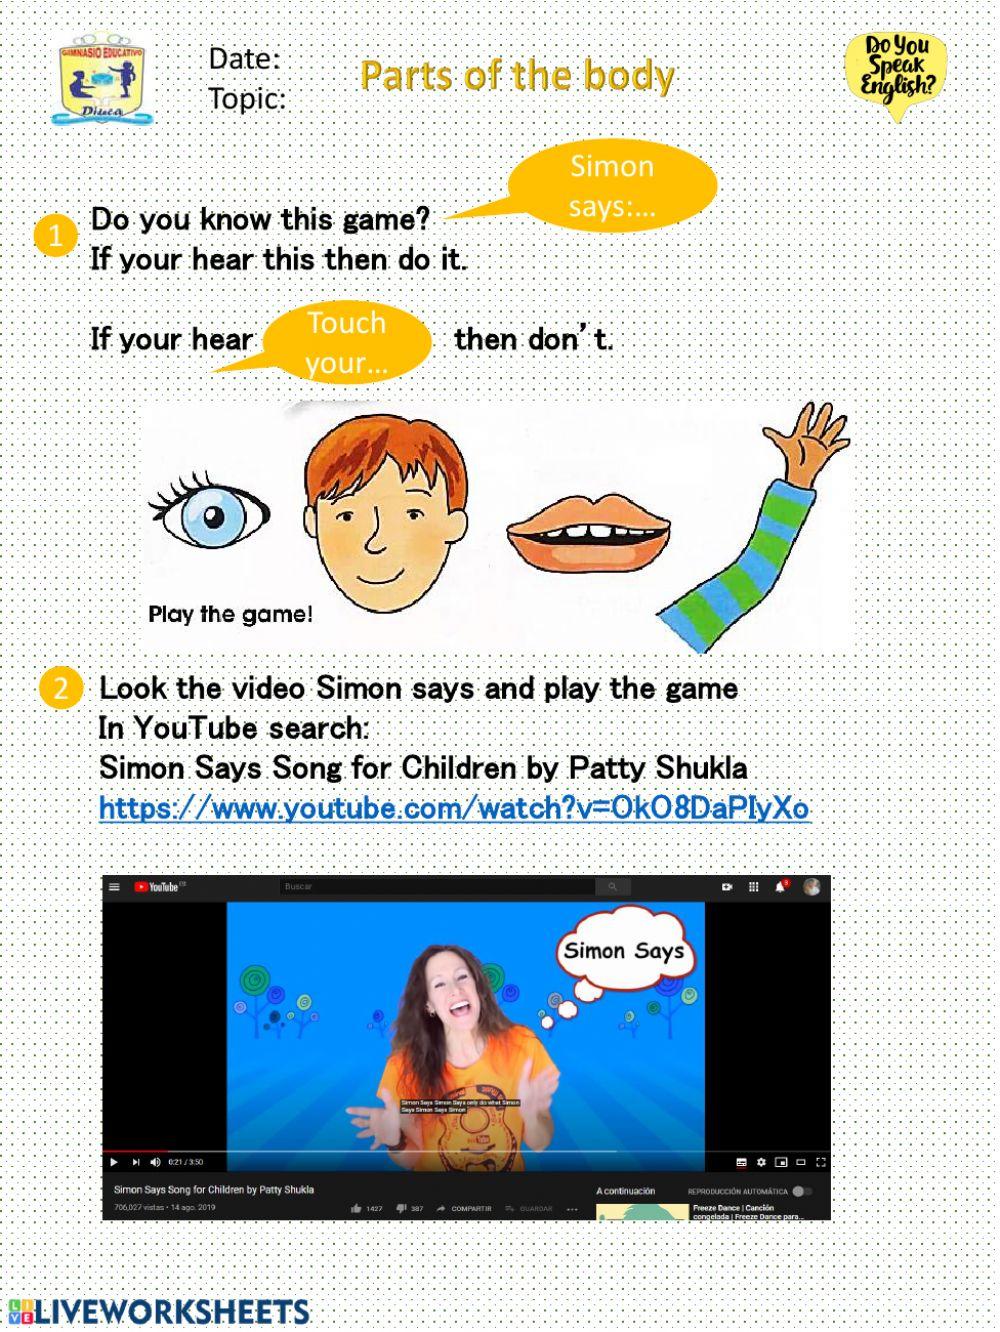 Simon Says Song for Children by Patty Shukla 